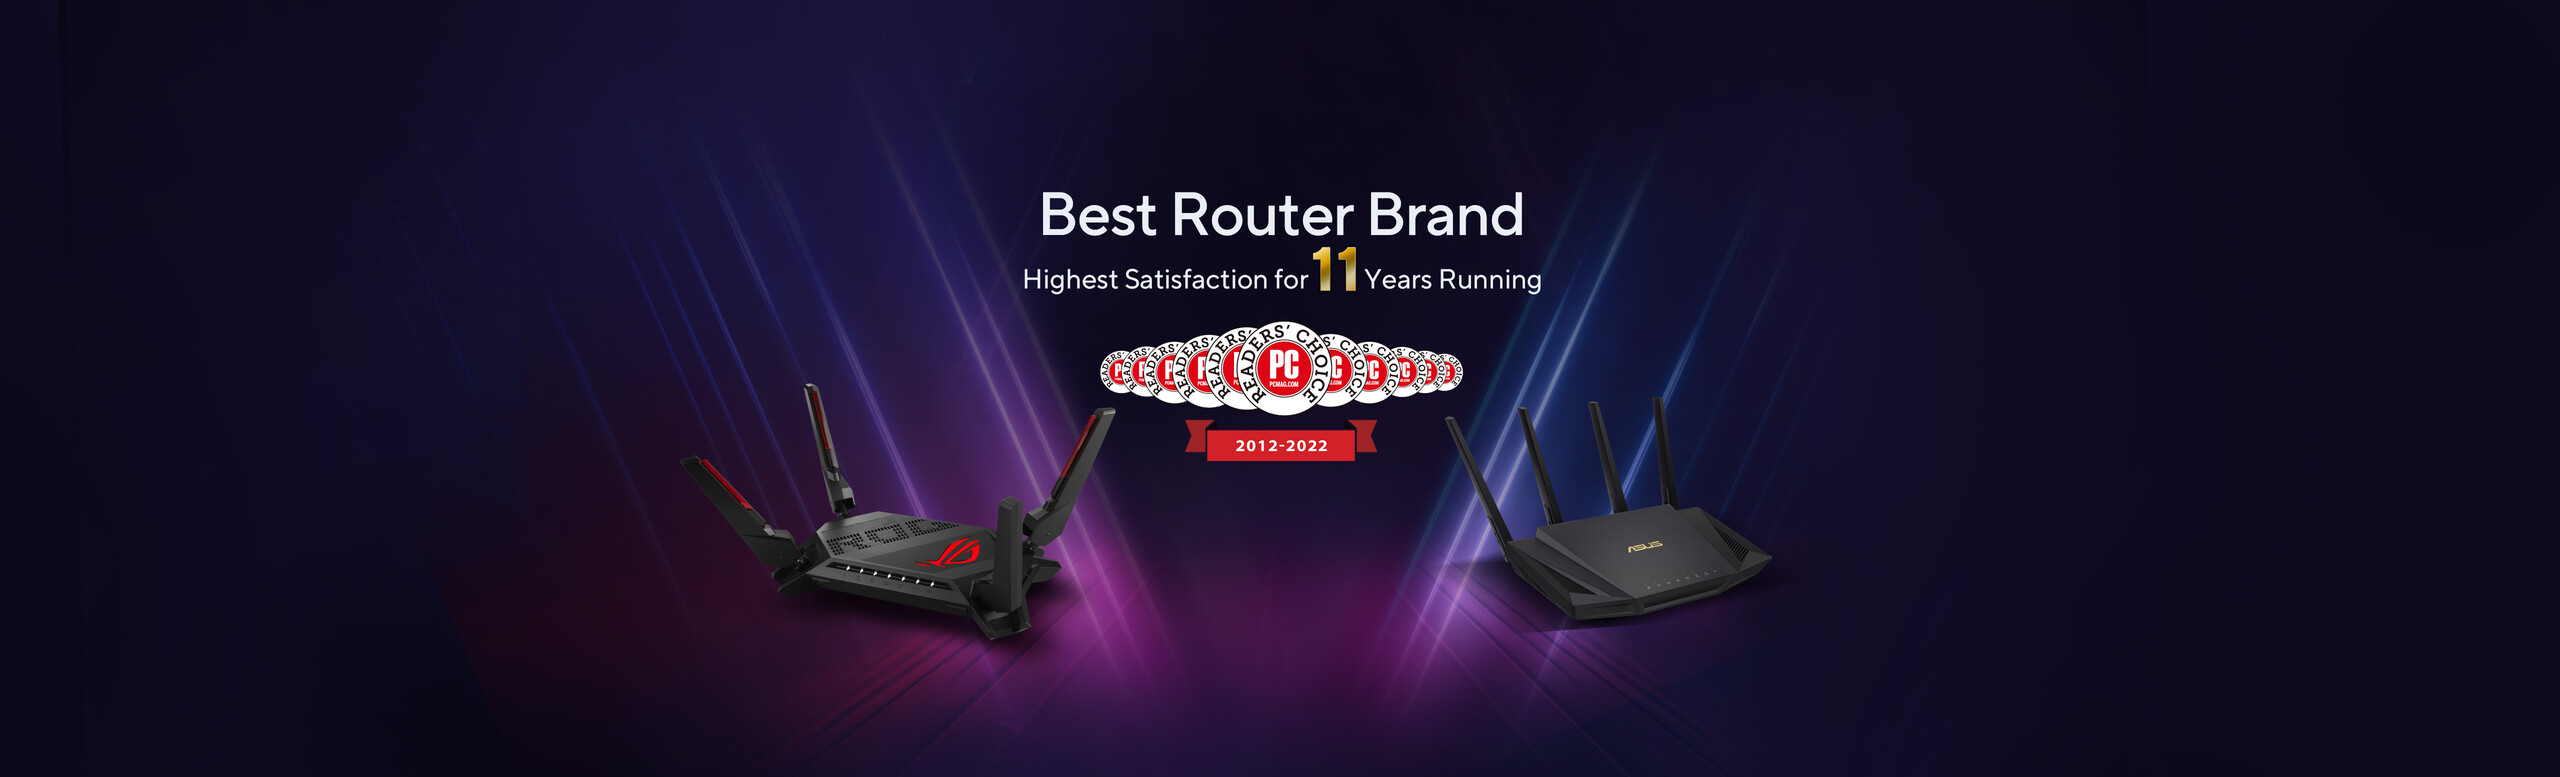 best router brand highest satisfaction for 11 years running